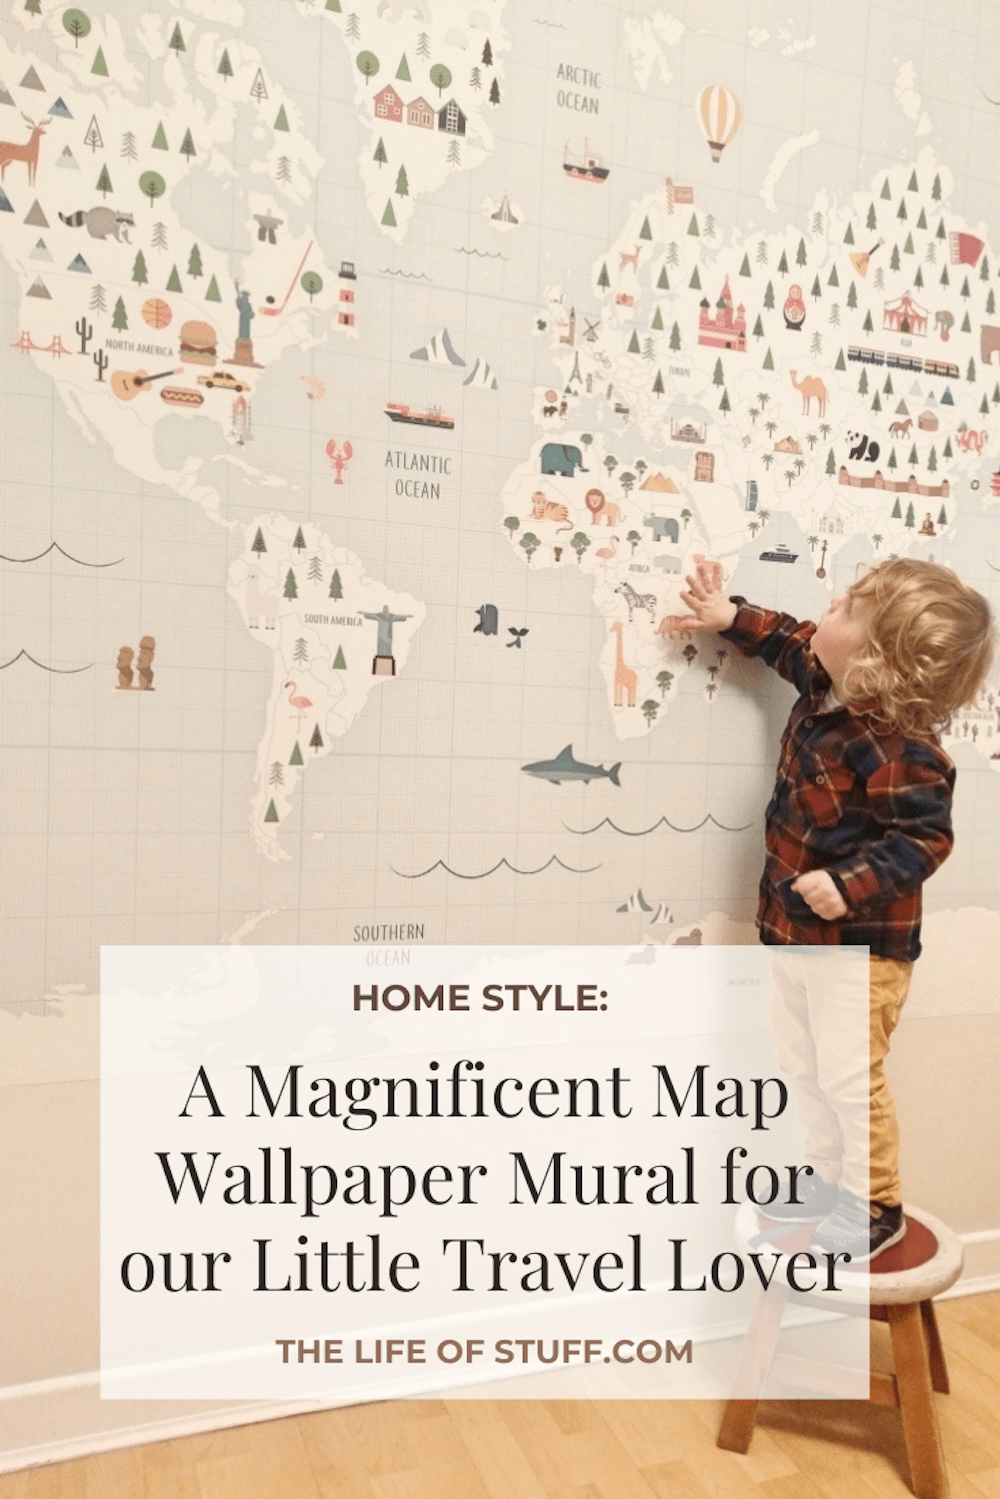 Home Style: A Magnificent Map Wallpaper Mural for our Little Travel Lover